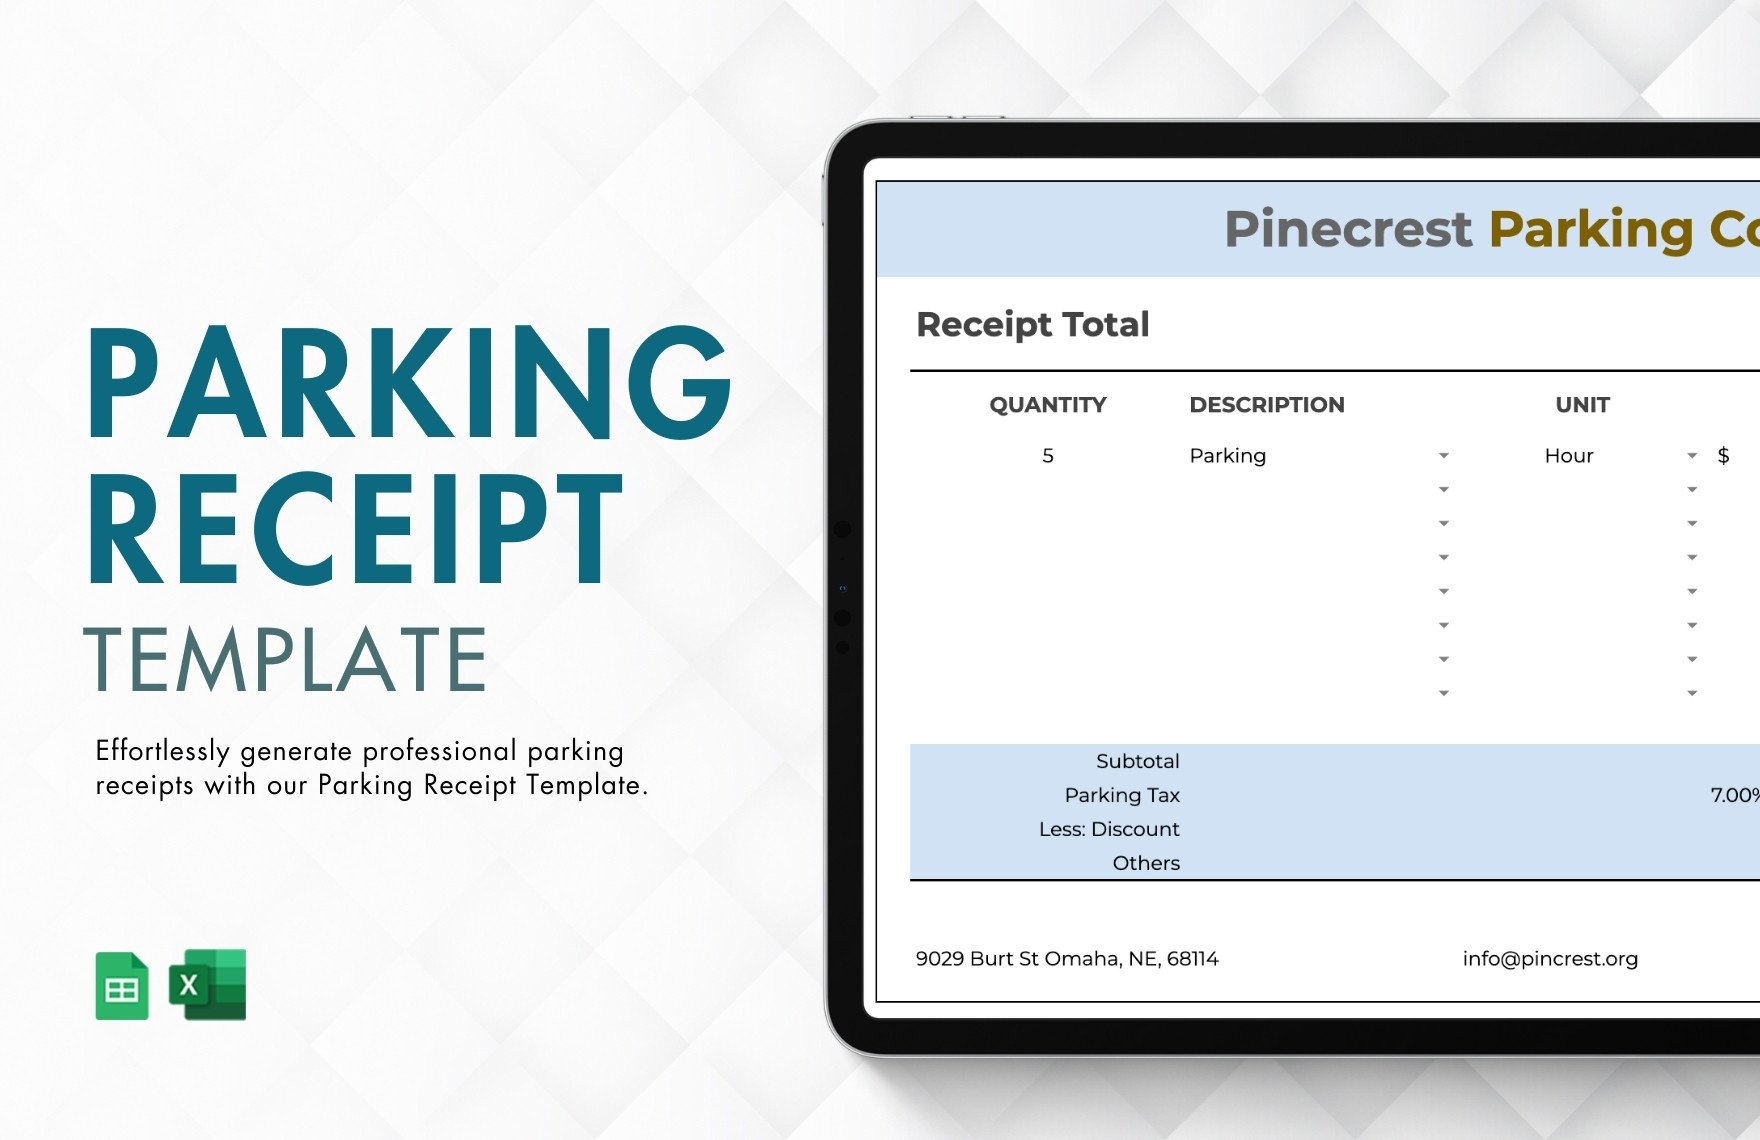 Parking Receipt Template in Excel, Google Sheets